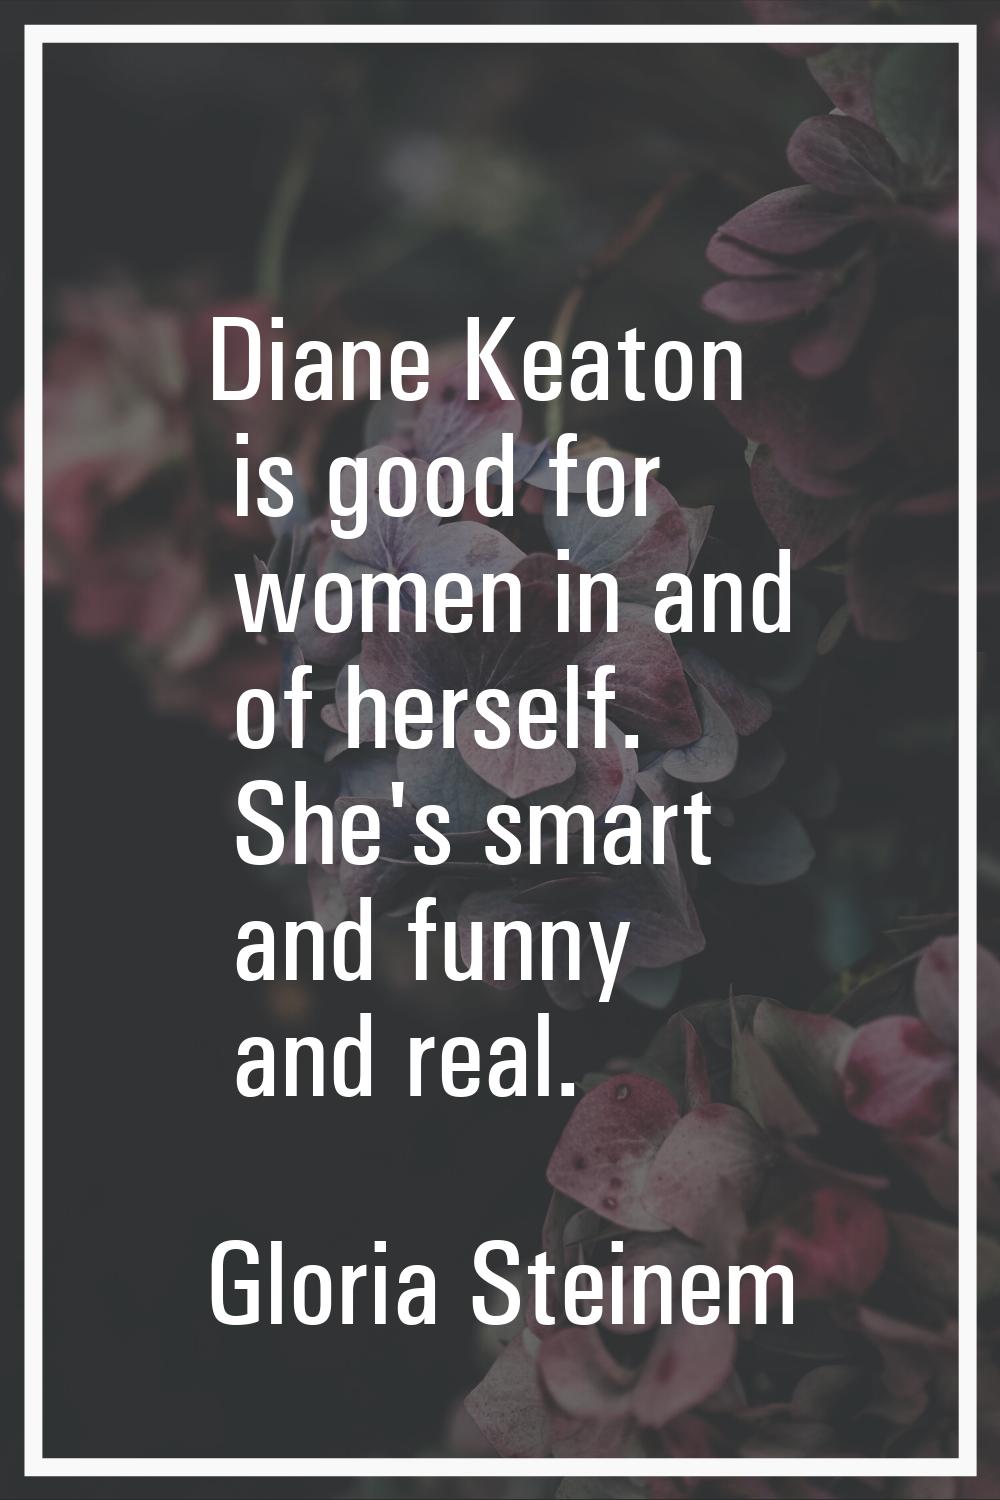 Diane Keaton is good for women in and of herself. She's smart and funny and real.